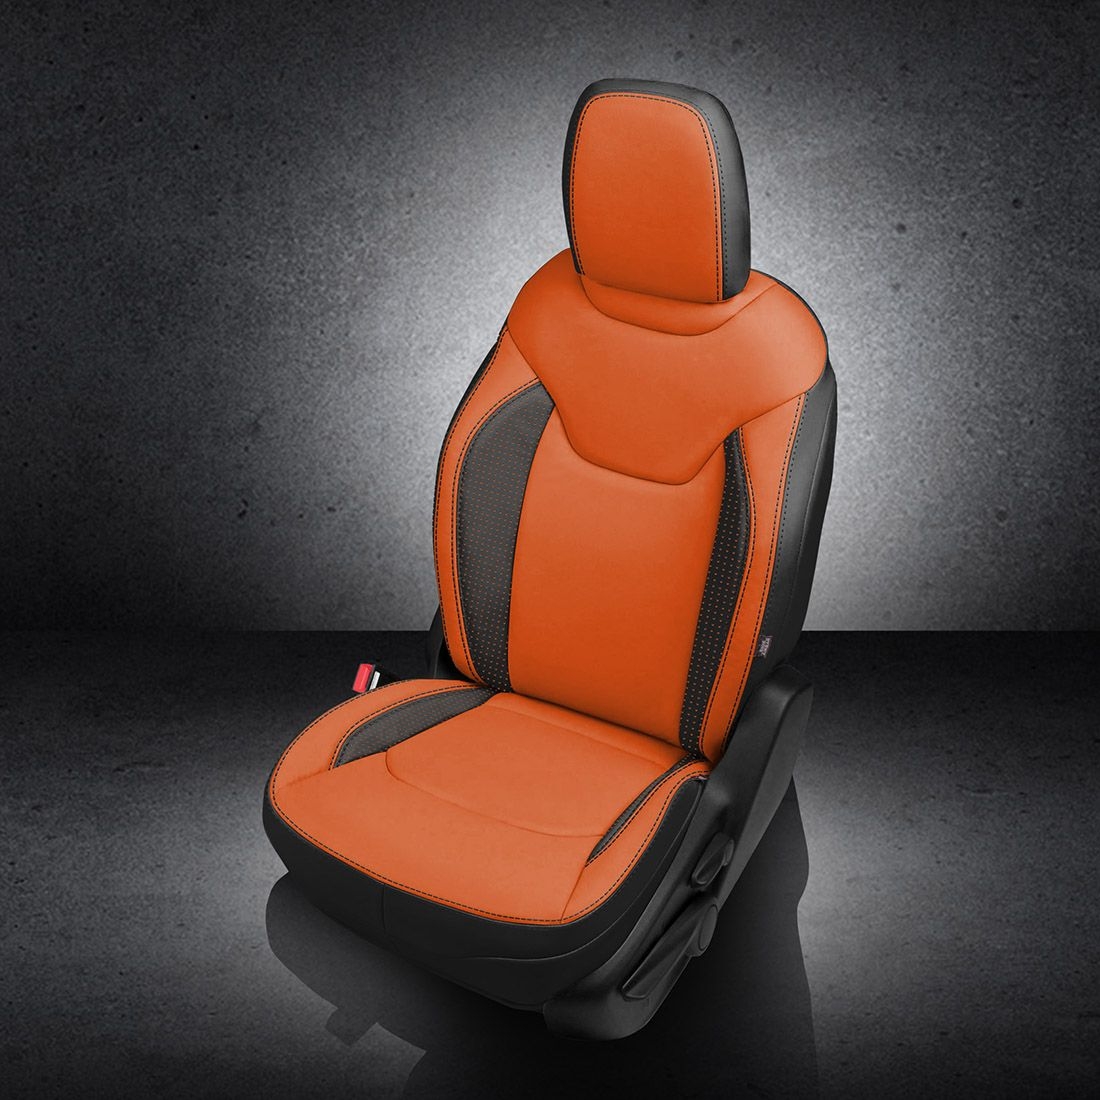 Jeep Renegade Seat Covers, Leather Seats, Interiors